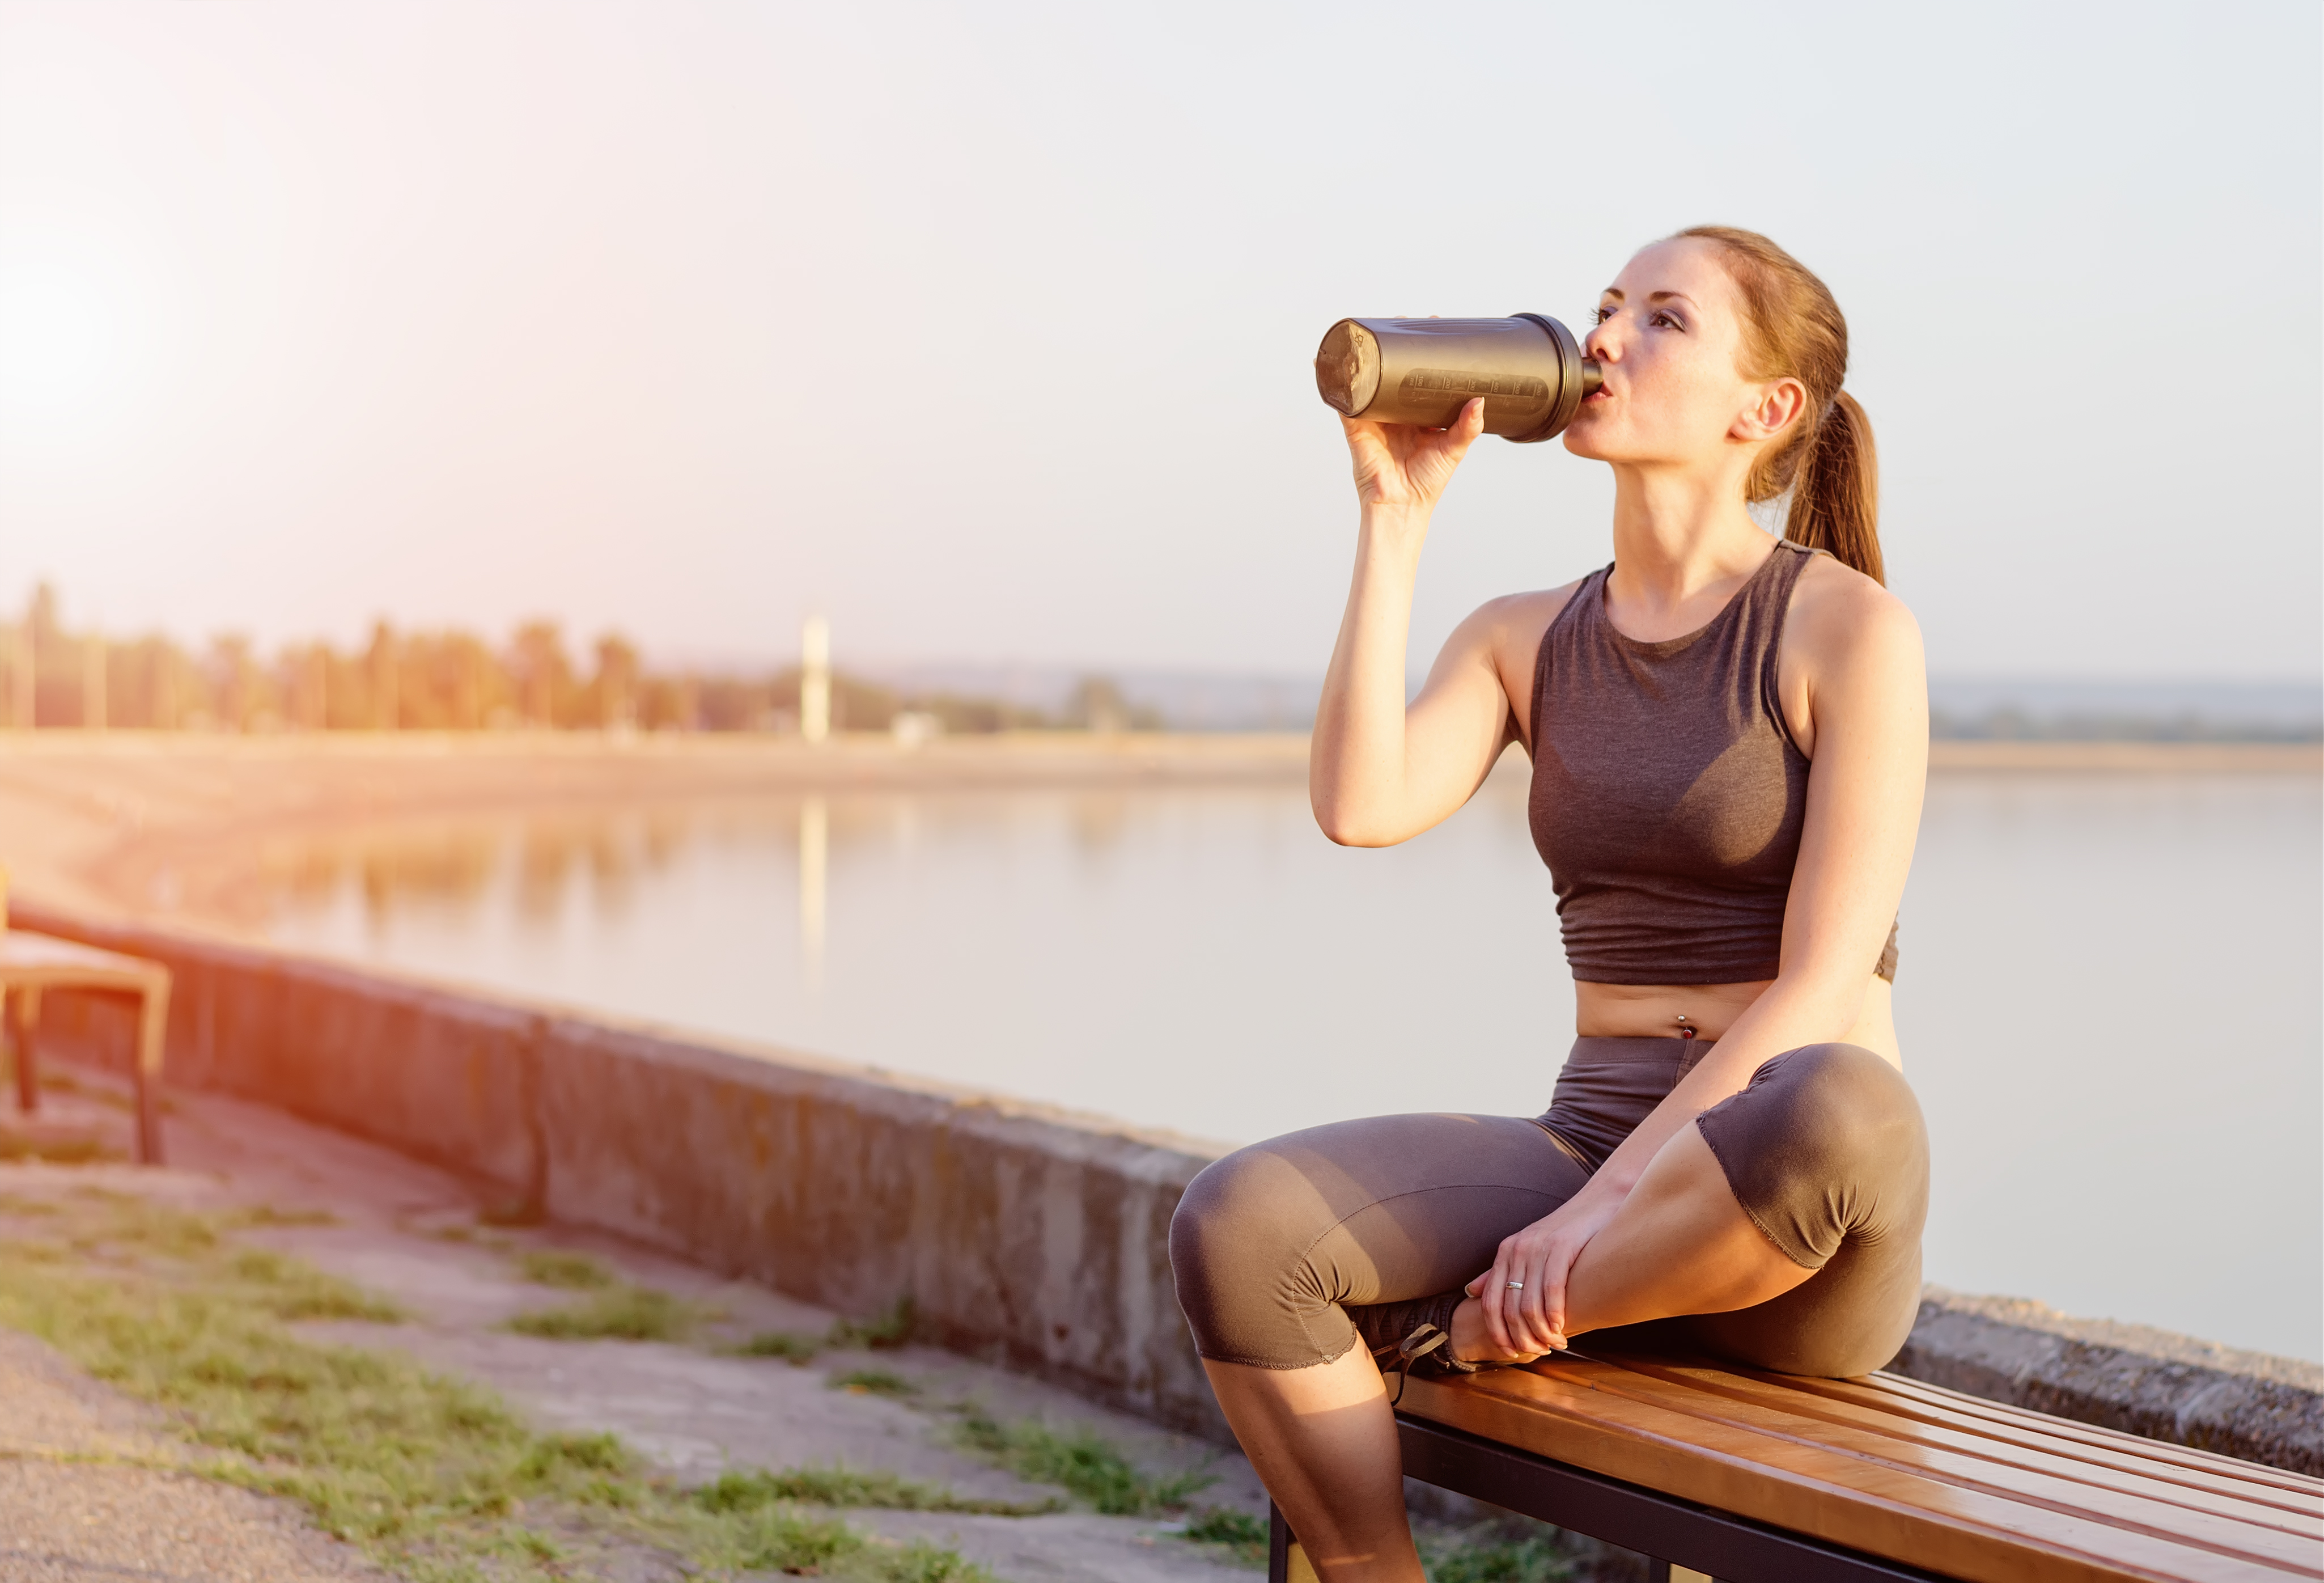 Supplements and shakes can be convenient (iStock/PA)